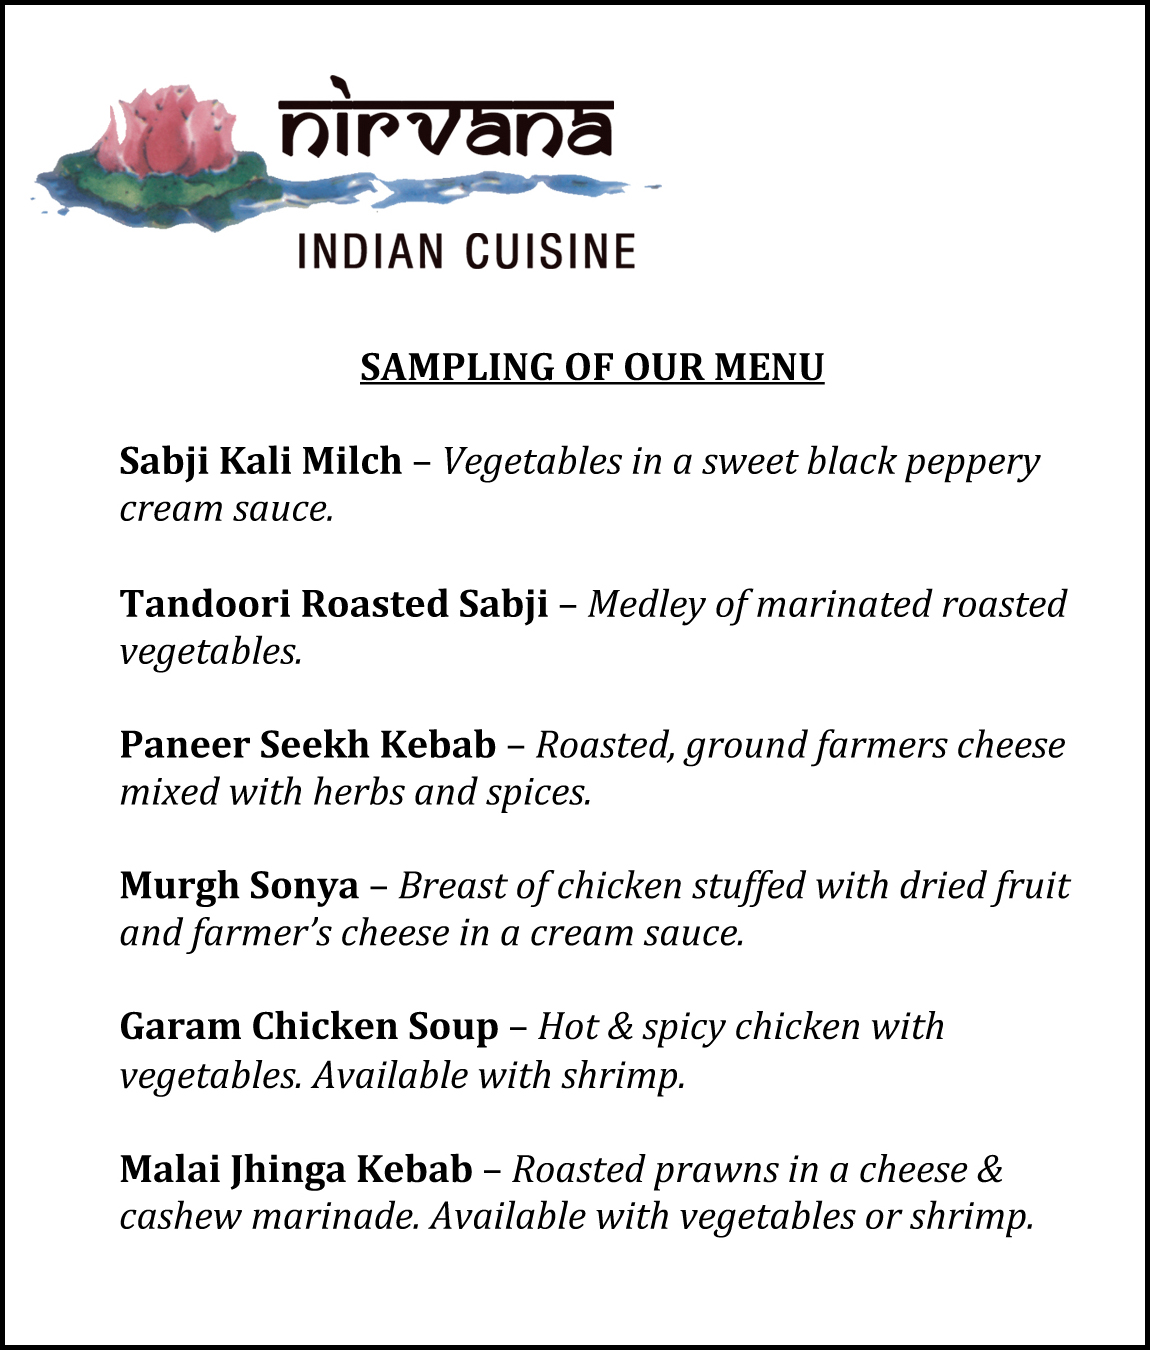 Advertiser Bulletin: Nirvana Indian Cuisine “The perfect place for a